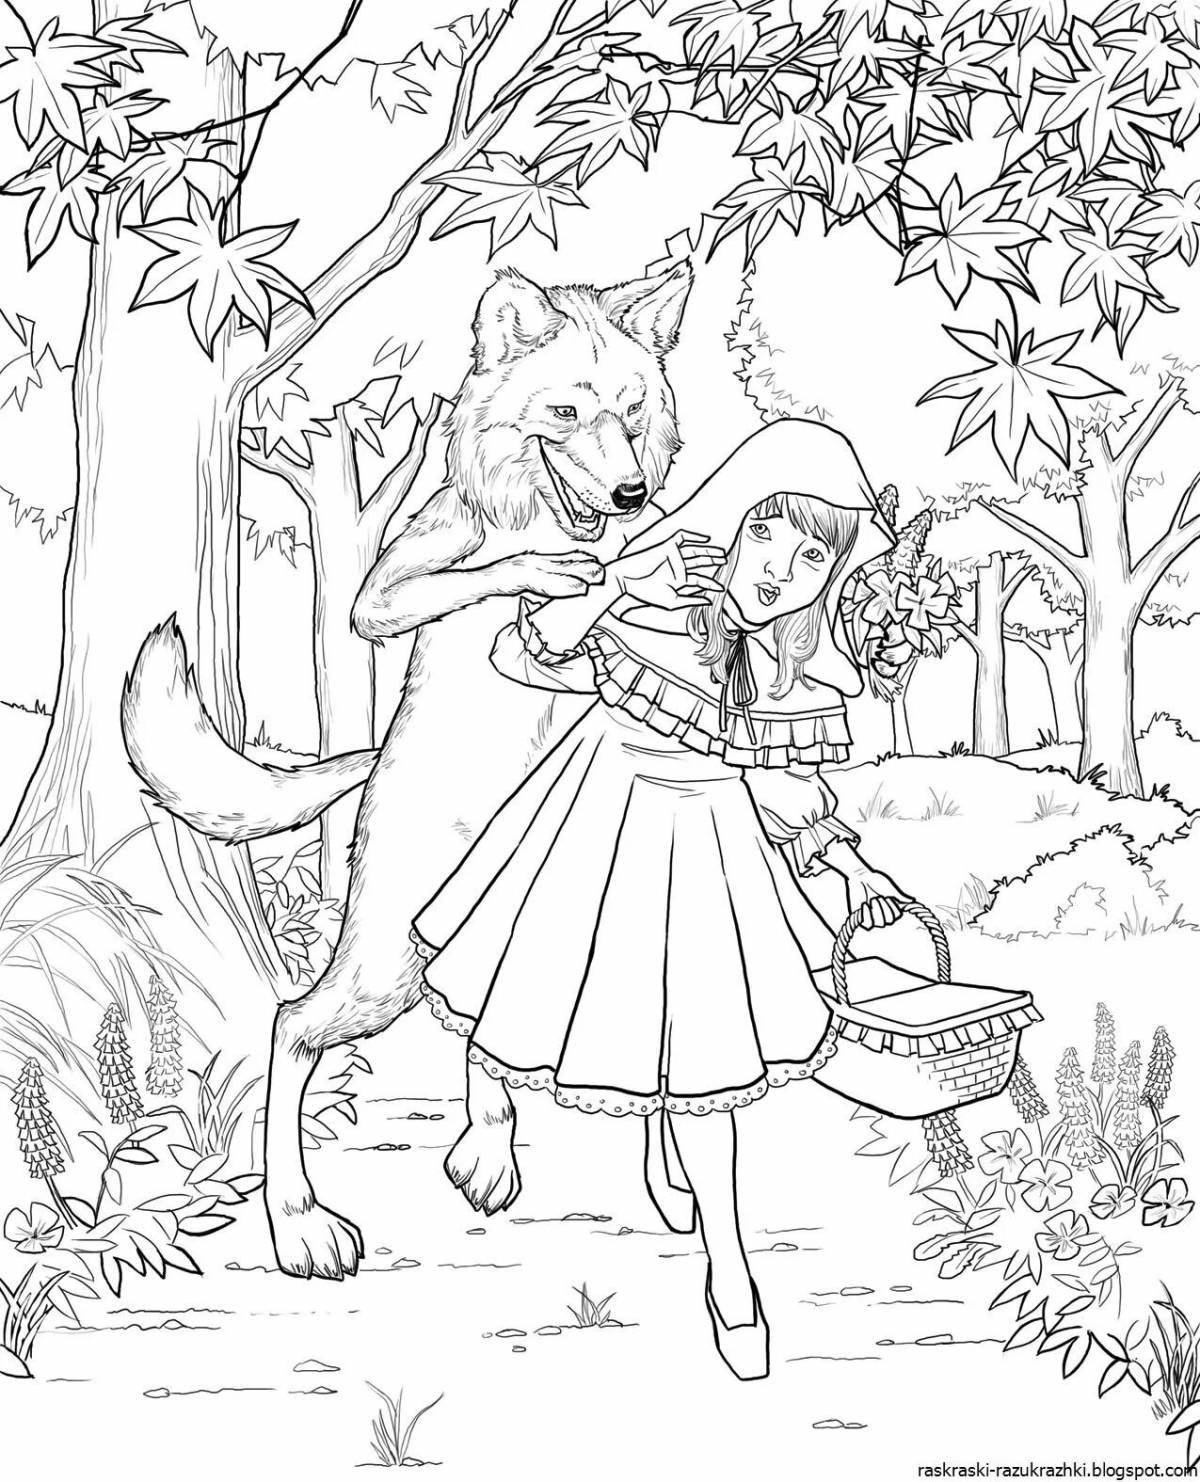 Wolf and little red riding hood #1